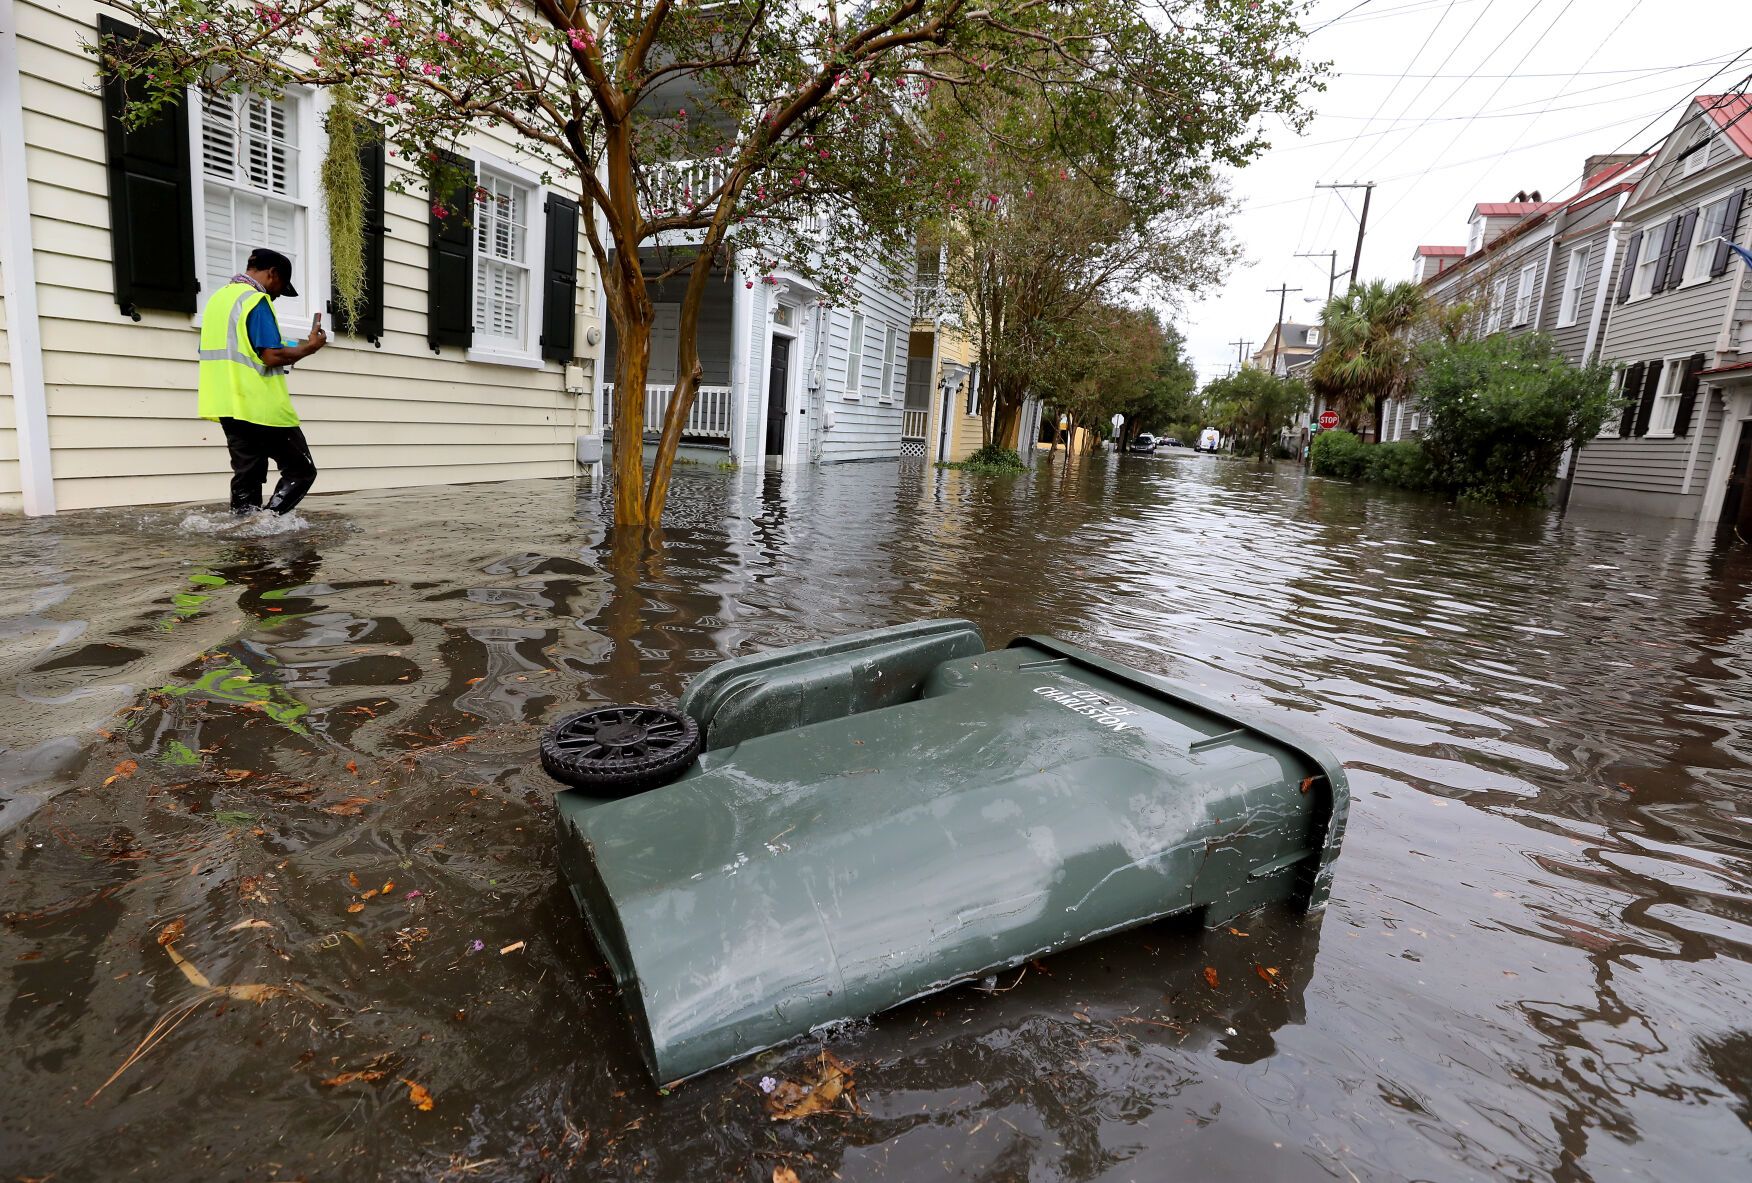 Keith Davis, who works at Ashley Hall, films the flooding from heavy rains on Vanderhorst Street on Friday, Sept. 25, 2020, in Charleston. Image by Grace Beahm Alford / Post and Courier. United States, 2020.